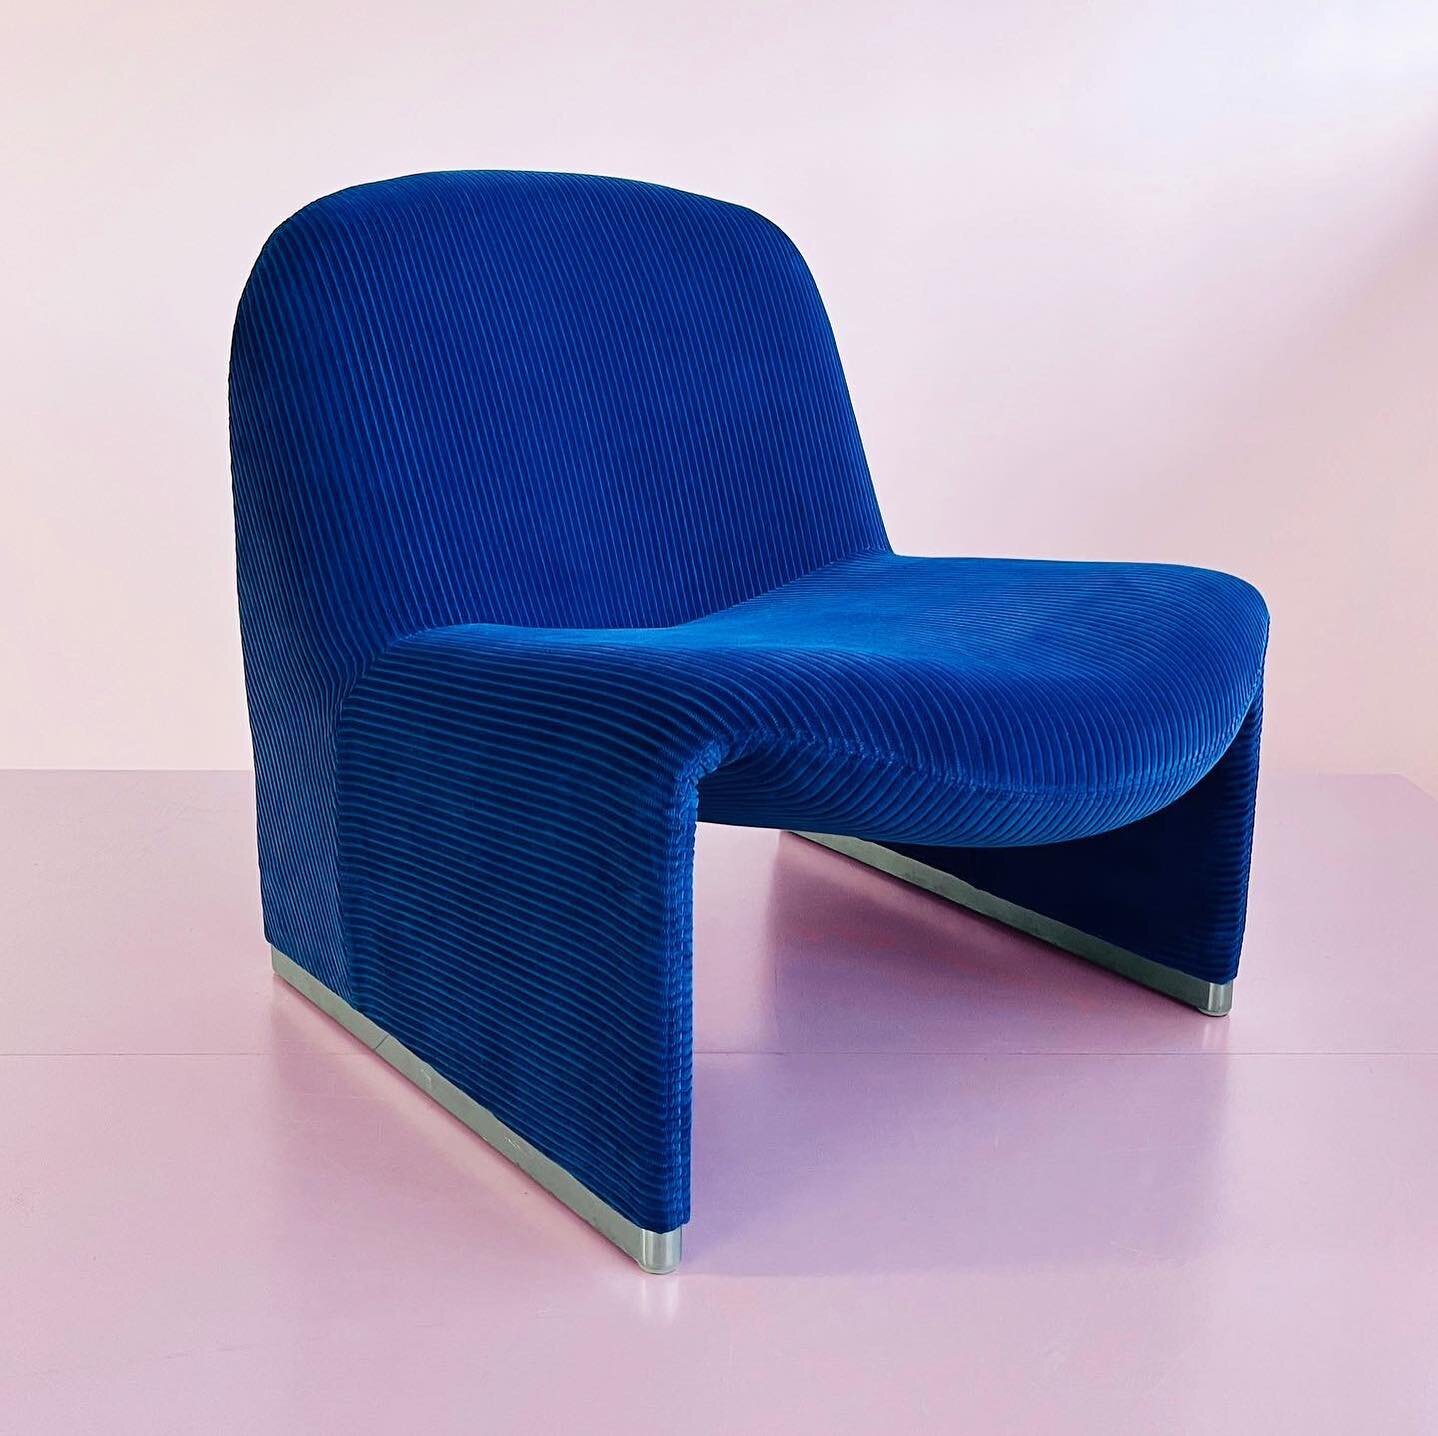 Sweetened this lovely Alky Chair right up over the weekend! Designed by Giancarlo Pretti and redone in Raf Simons for Kvadrat Phlox wide wale corduroy in a shade inspired by Yves Klein Blue. A homage to its past and total gush moment. I'm so tickled 